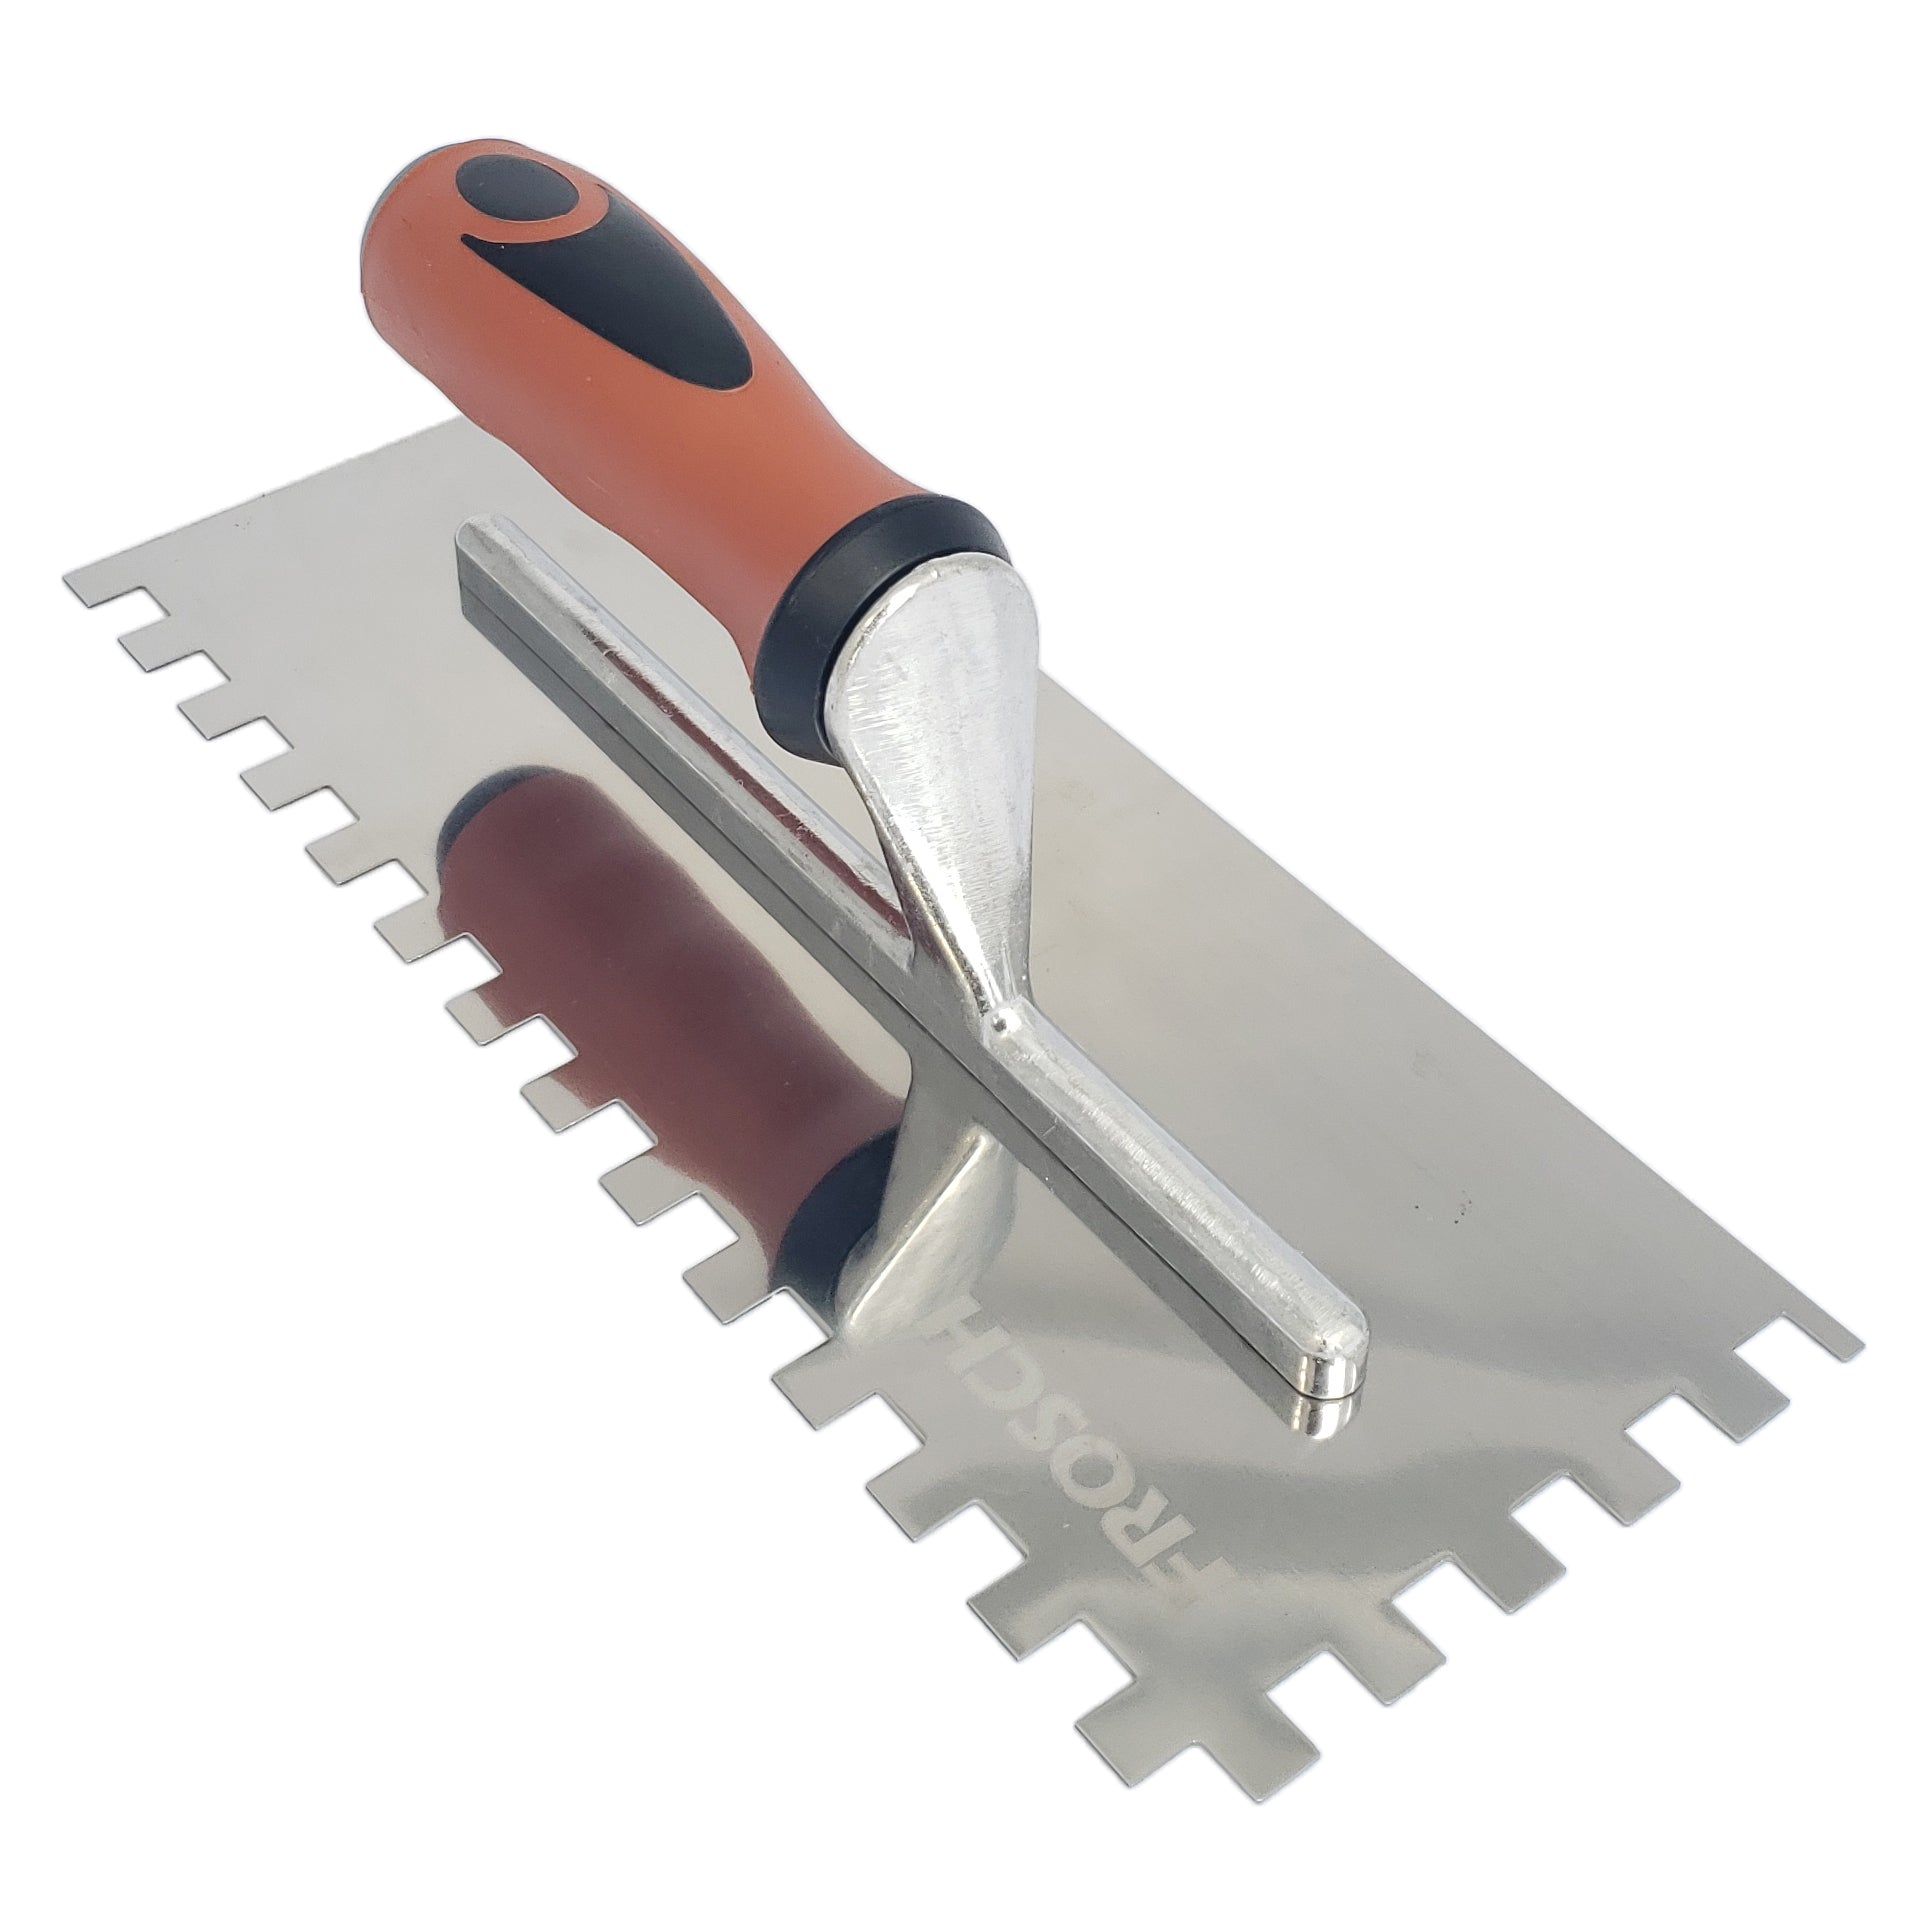 Stainless Steel Square Notch Trowel - 3/8" X 3/8"